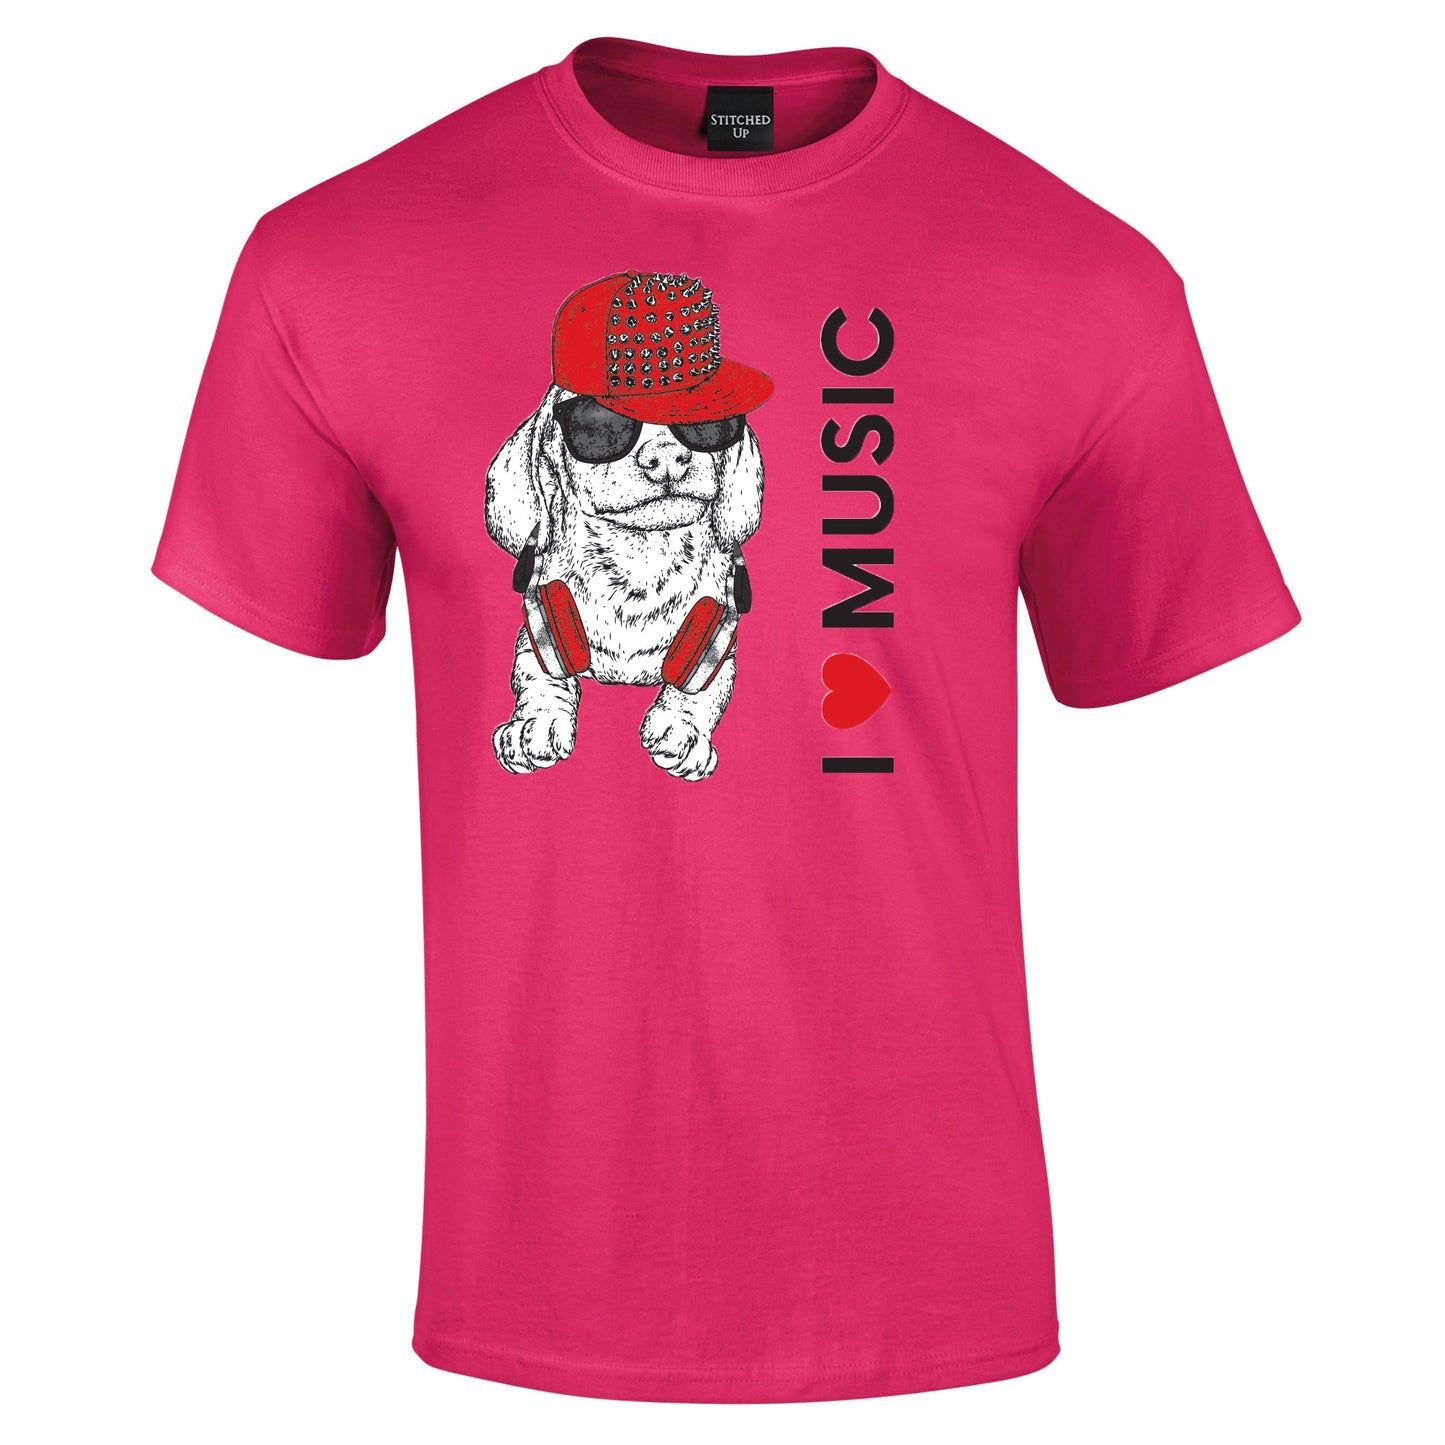 The I Love Music Puppy T Ladies or Gents Cut